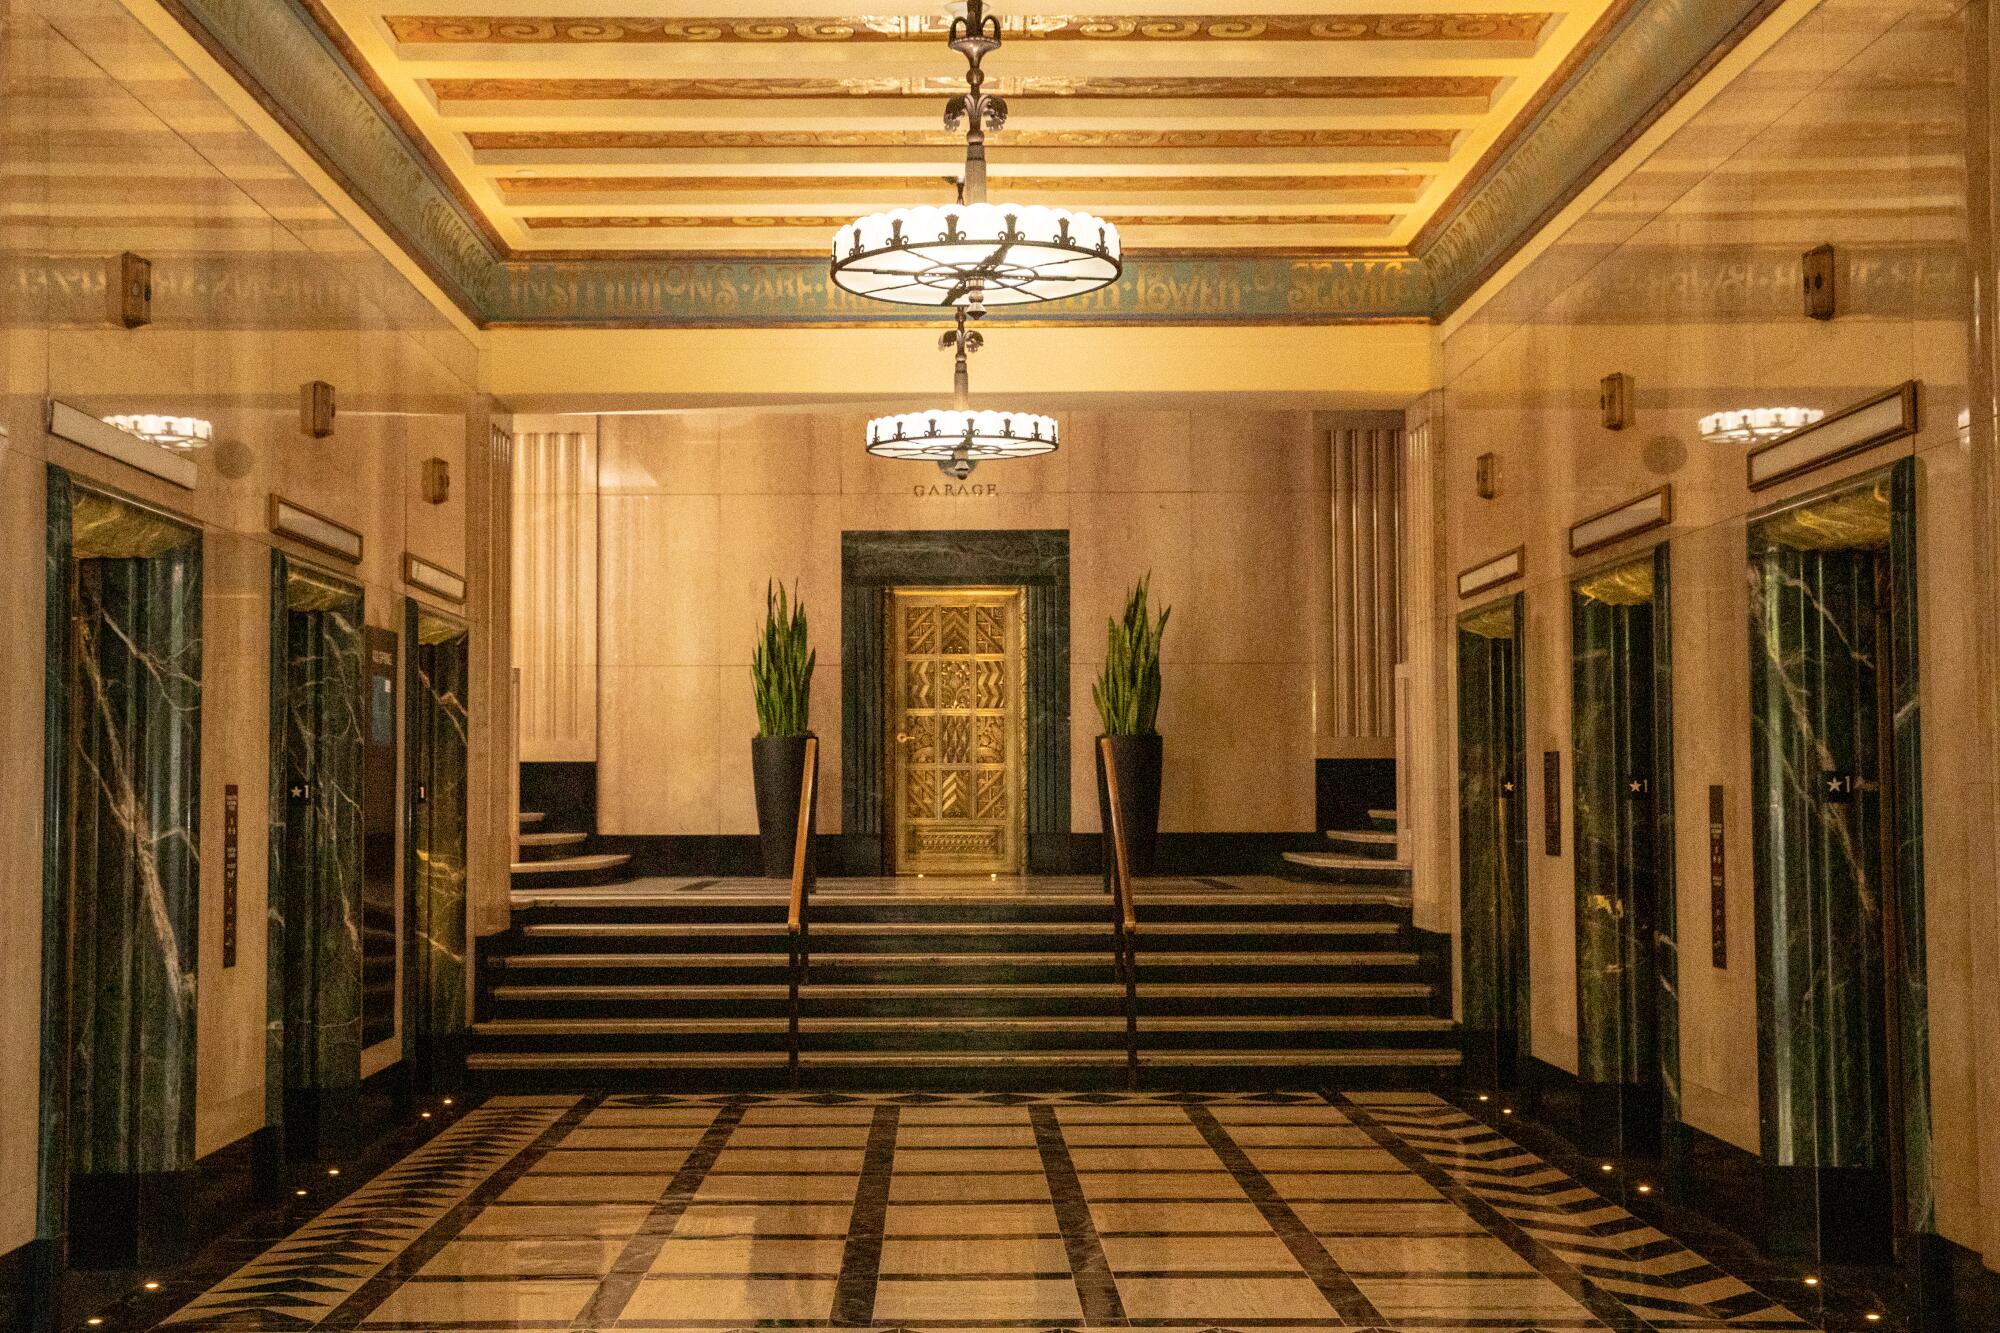 The foyer of an Art Deco building